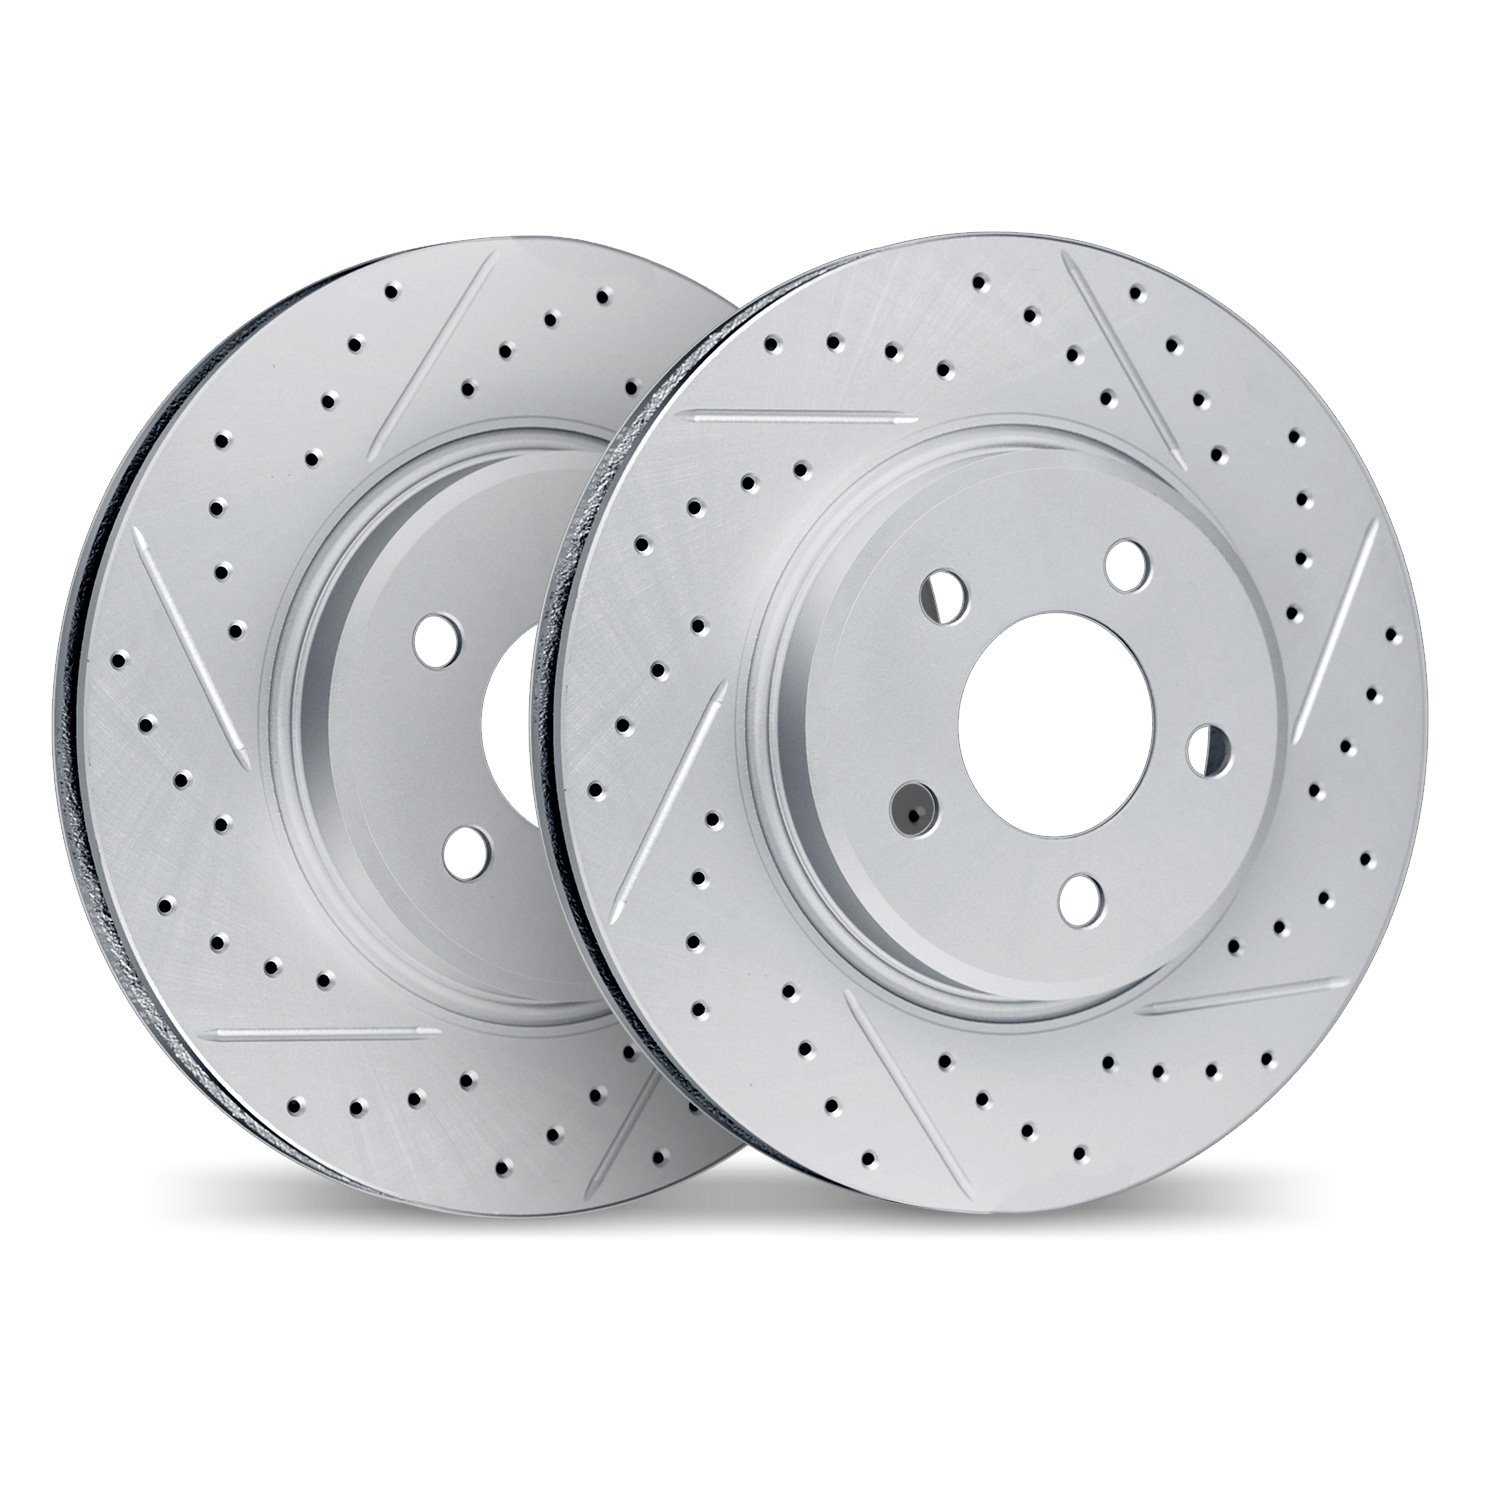 2002-47012 Geoperformance Drilled/Slotted Brake Rotors, Fits Select GM, Position: Front